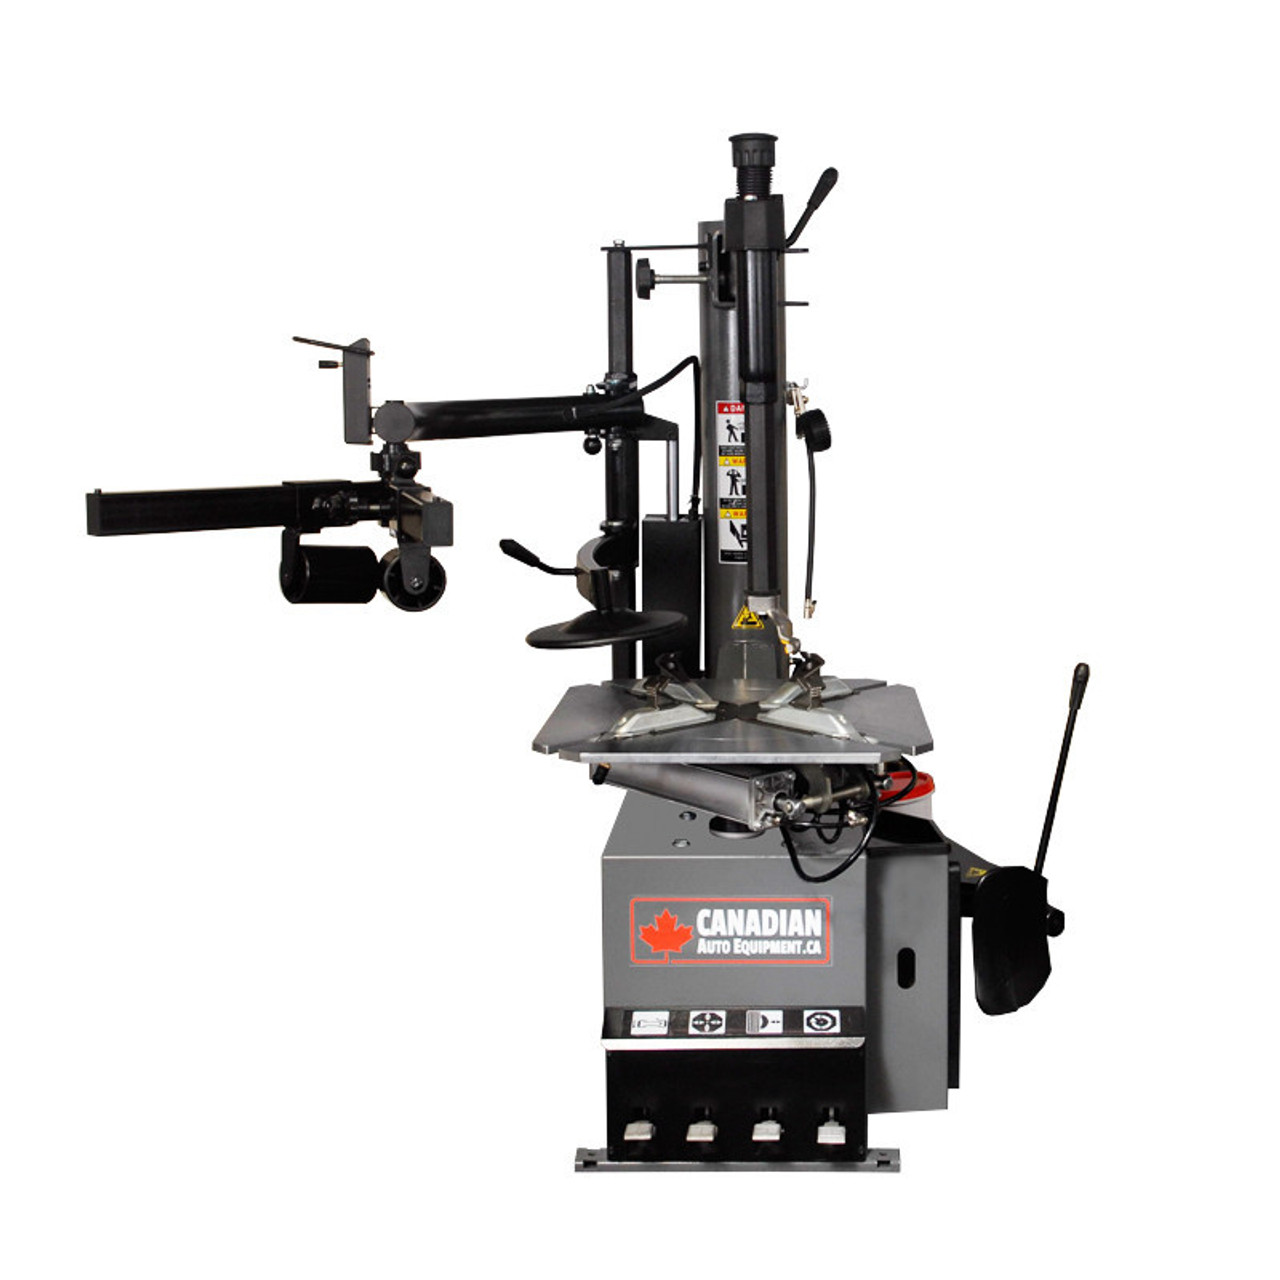 CAE-2725DAA Tire Changer with Left & Right Hand Assist & CAE-3224 Wheel Balancer with Automatic Entry